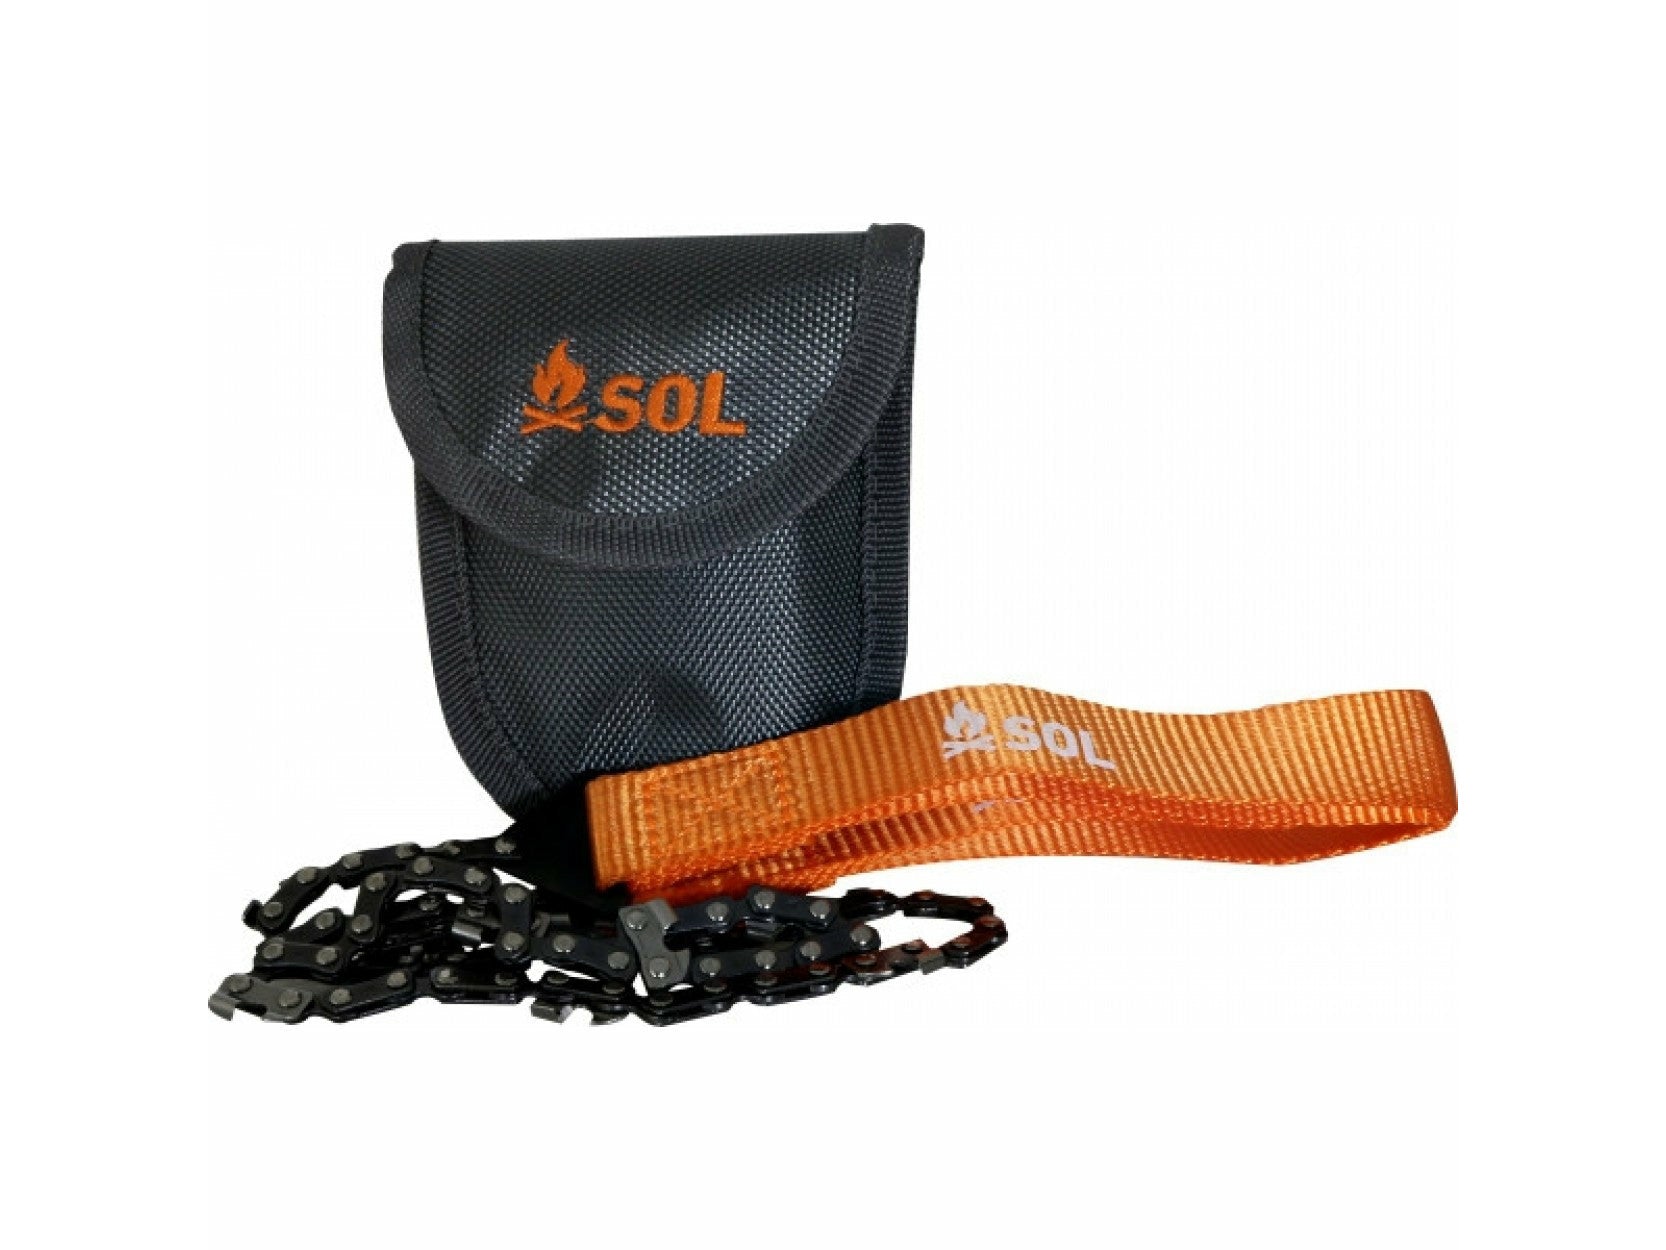 SOL Pocket Chain Saw with Pouch